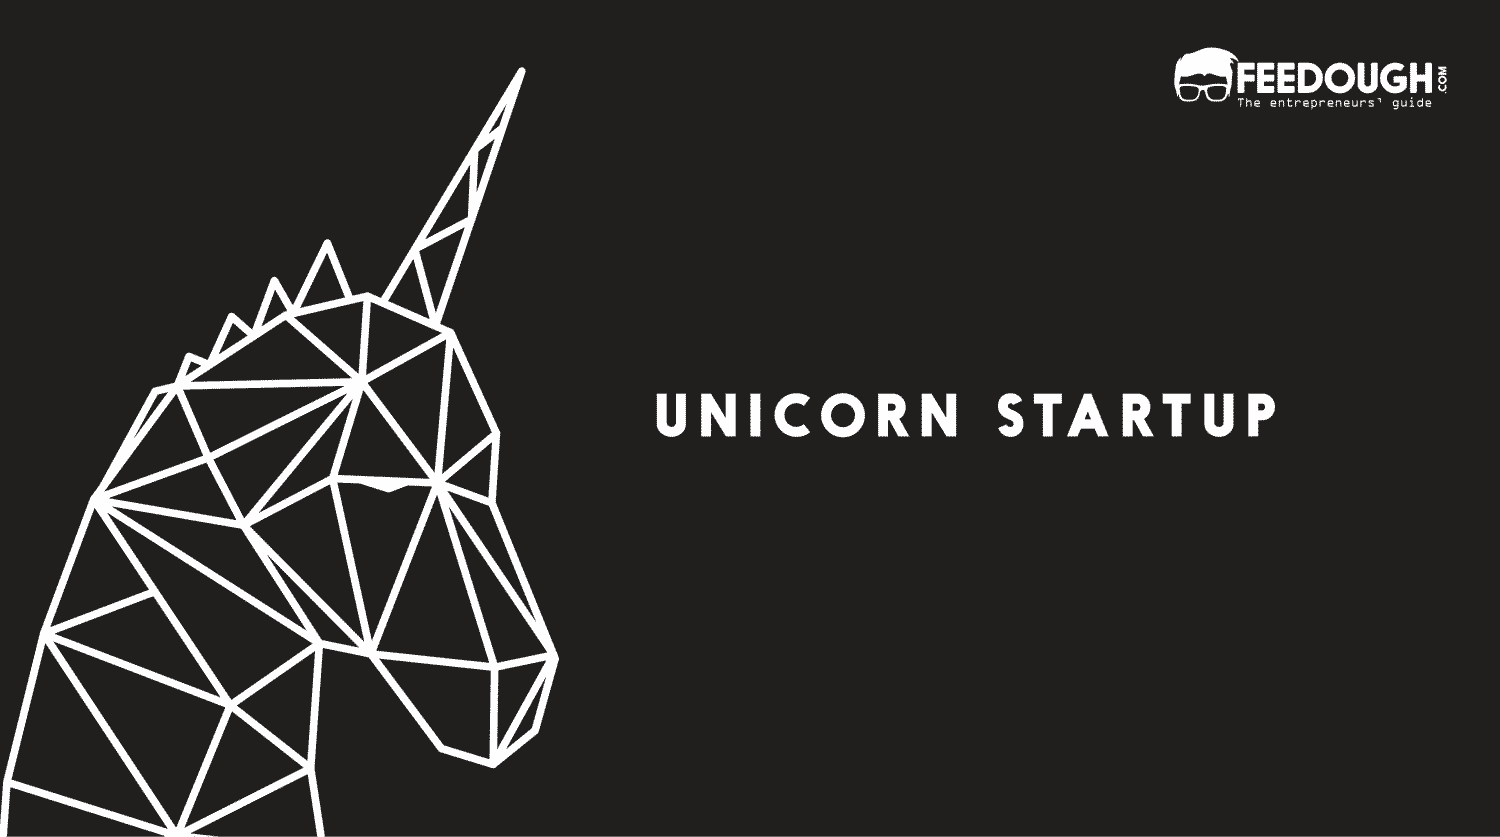 What Is A Unicorn Startup Company?